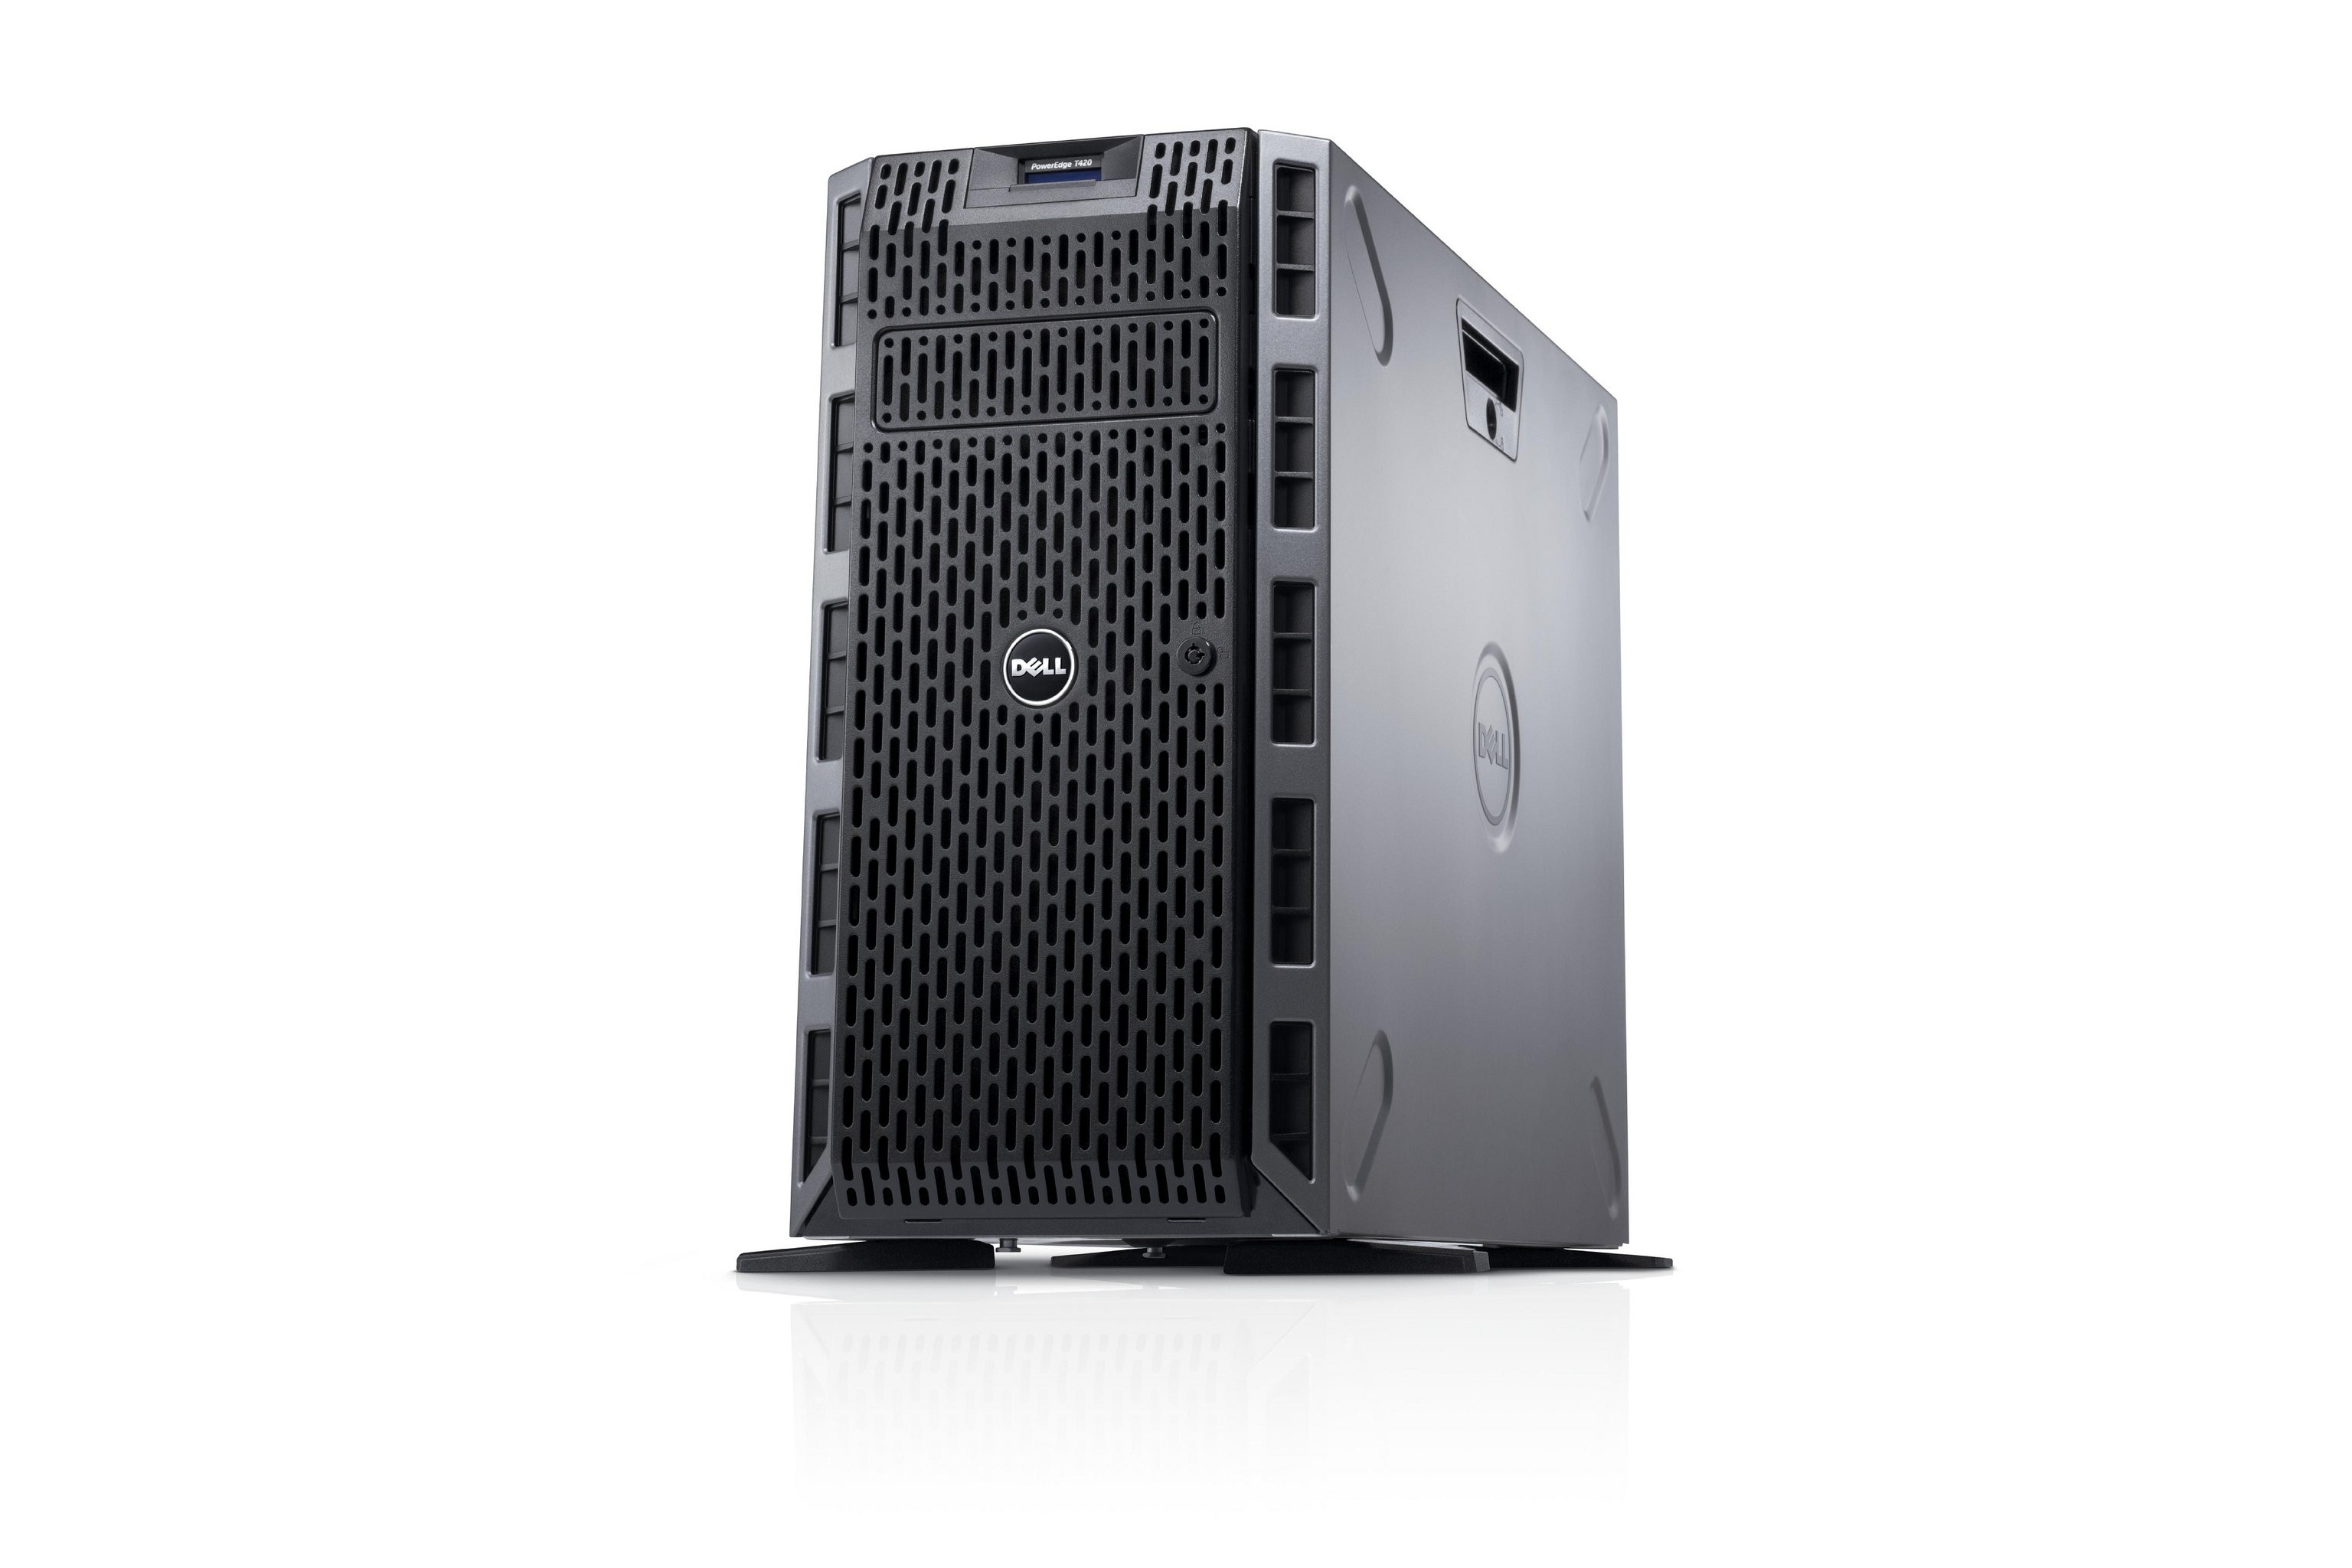 Dell PowerEdge T420 8x 3.5" (LFF) Tower Server - Front